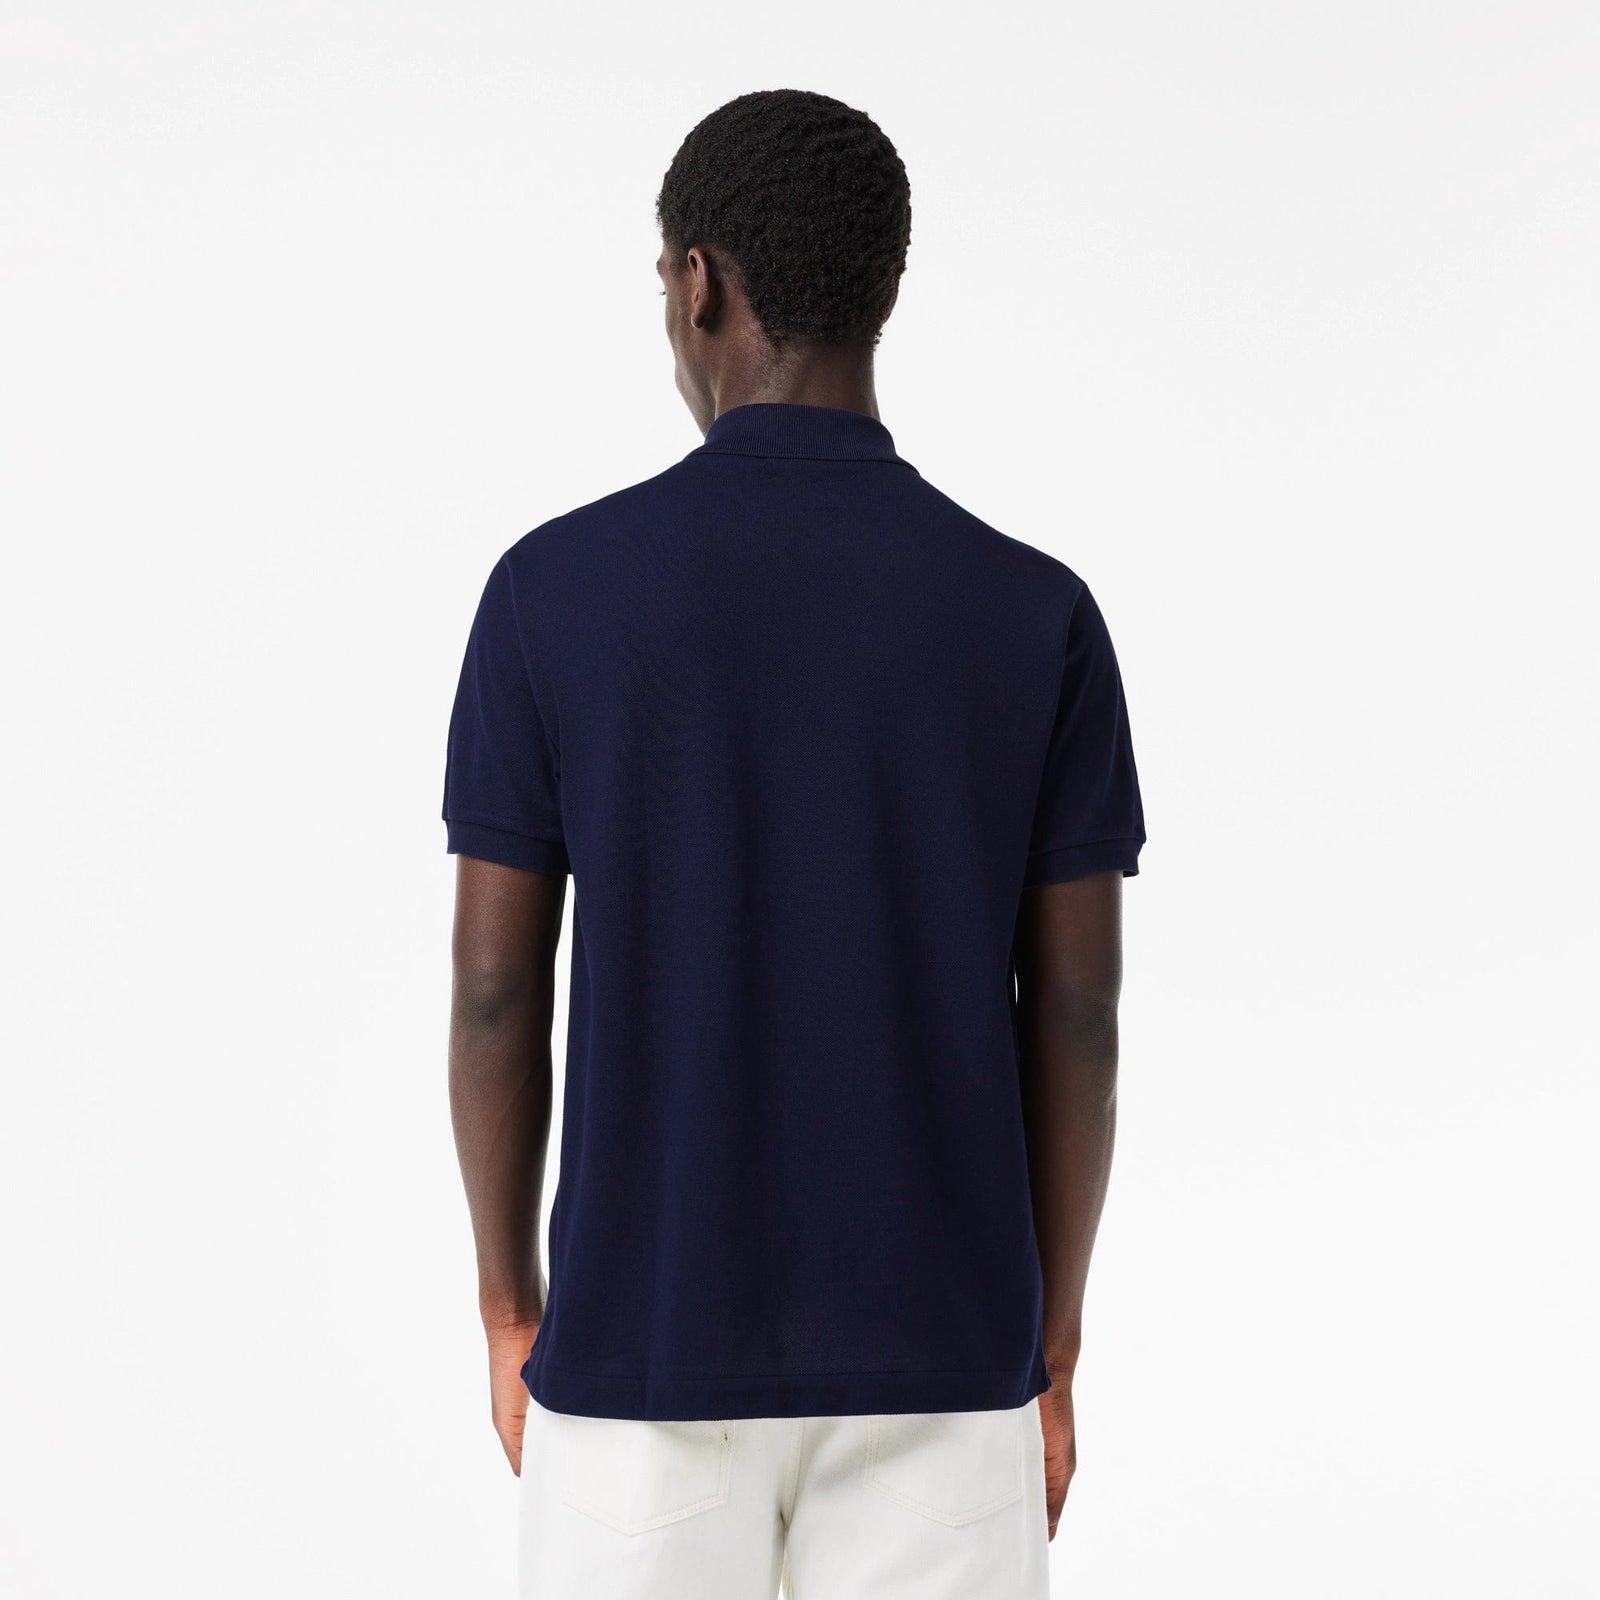 Lacoste Polo Shirt Classic Fit in Navy